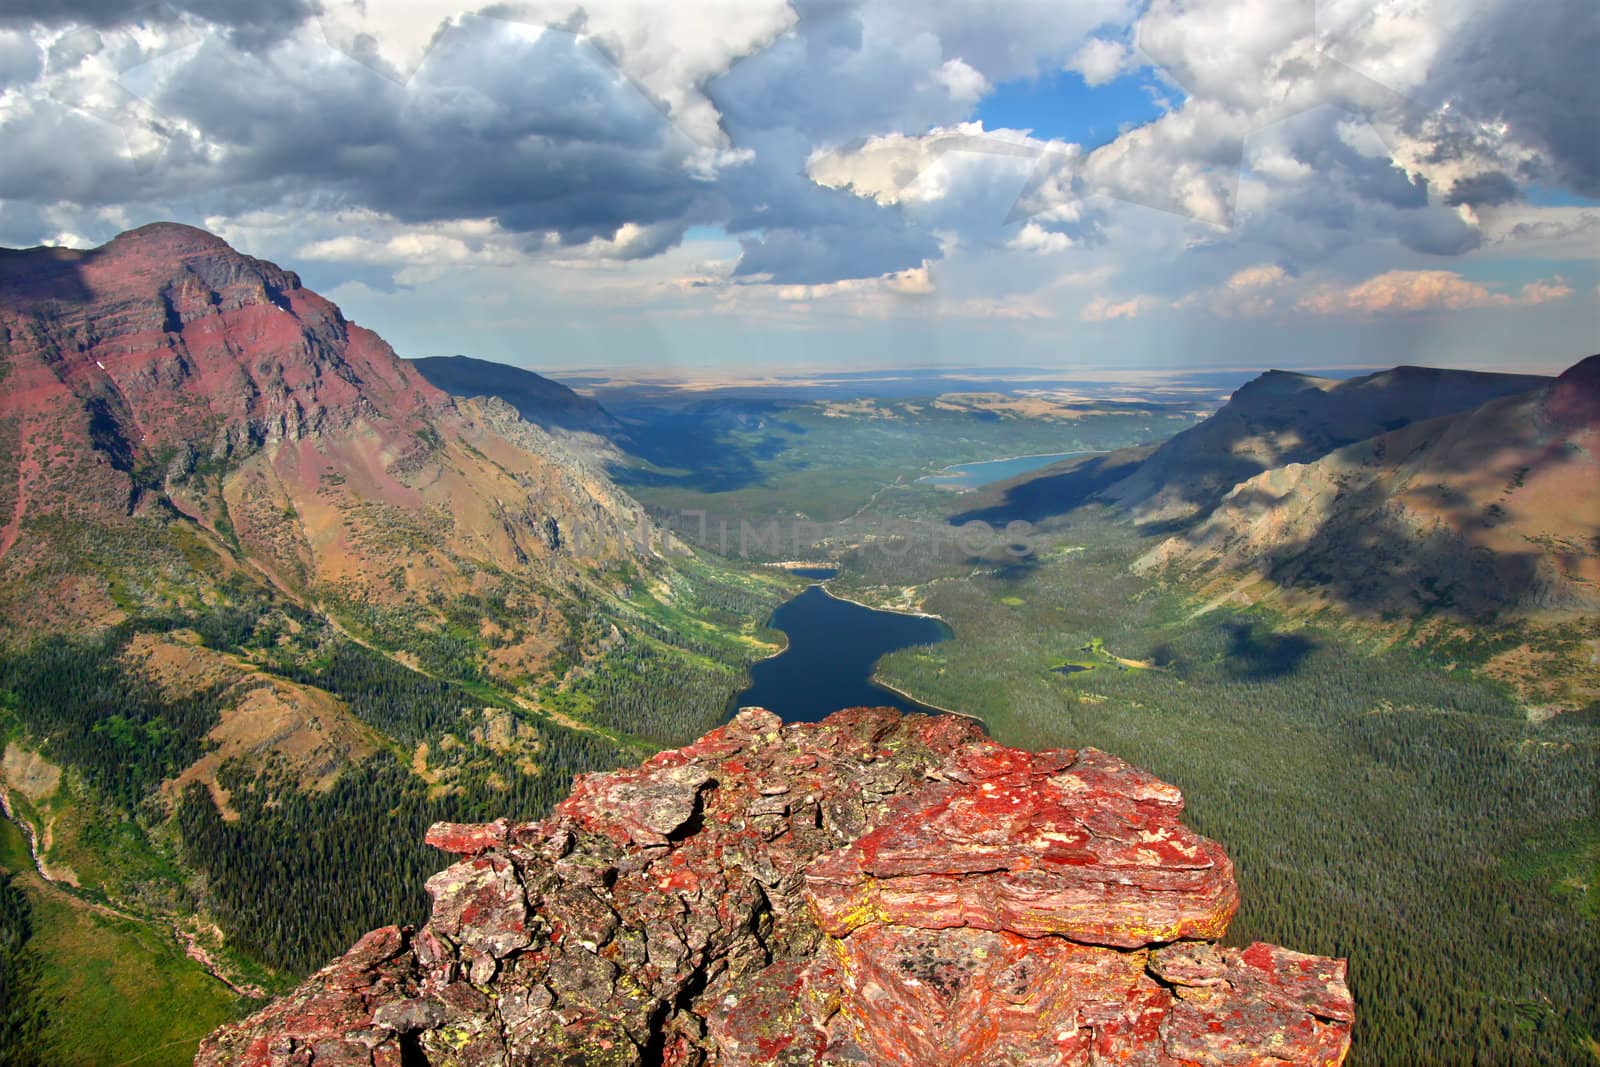 Mountaintop view of rugged alpine scenery in Glacier National Park.